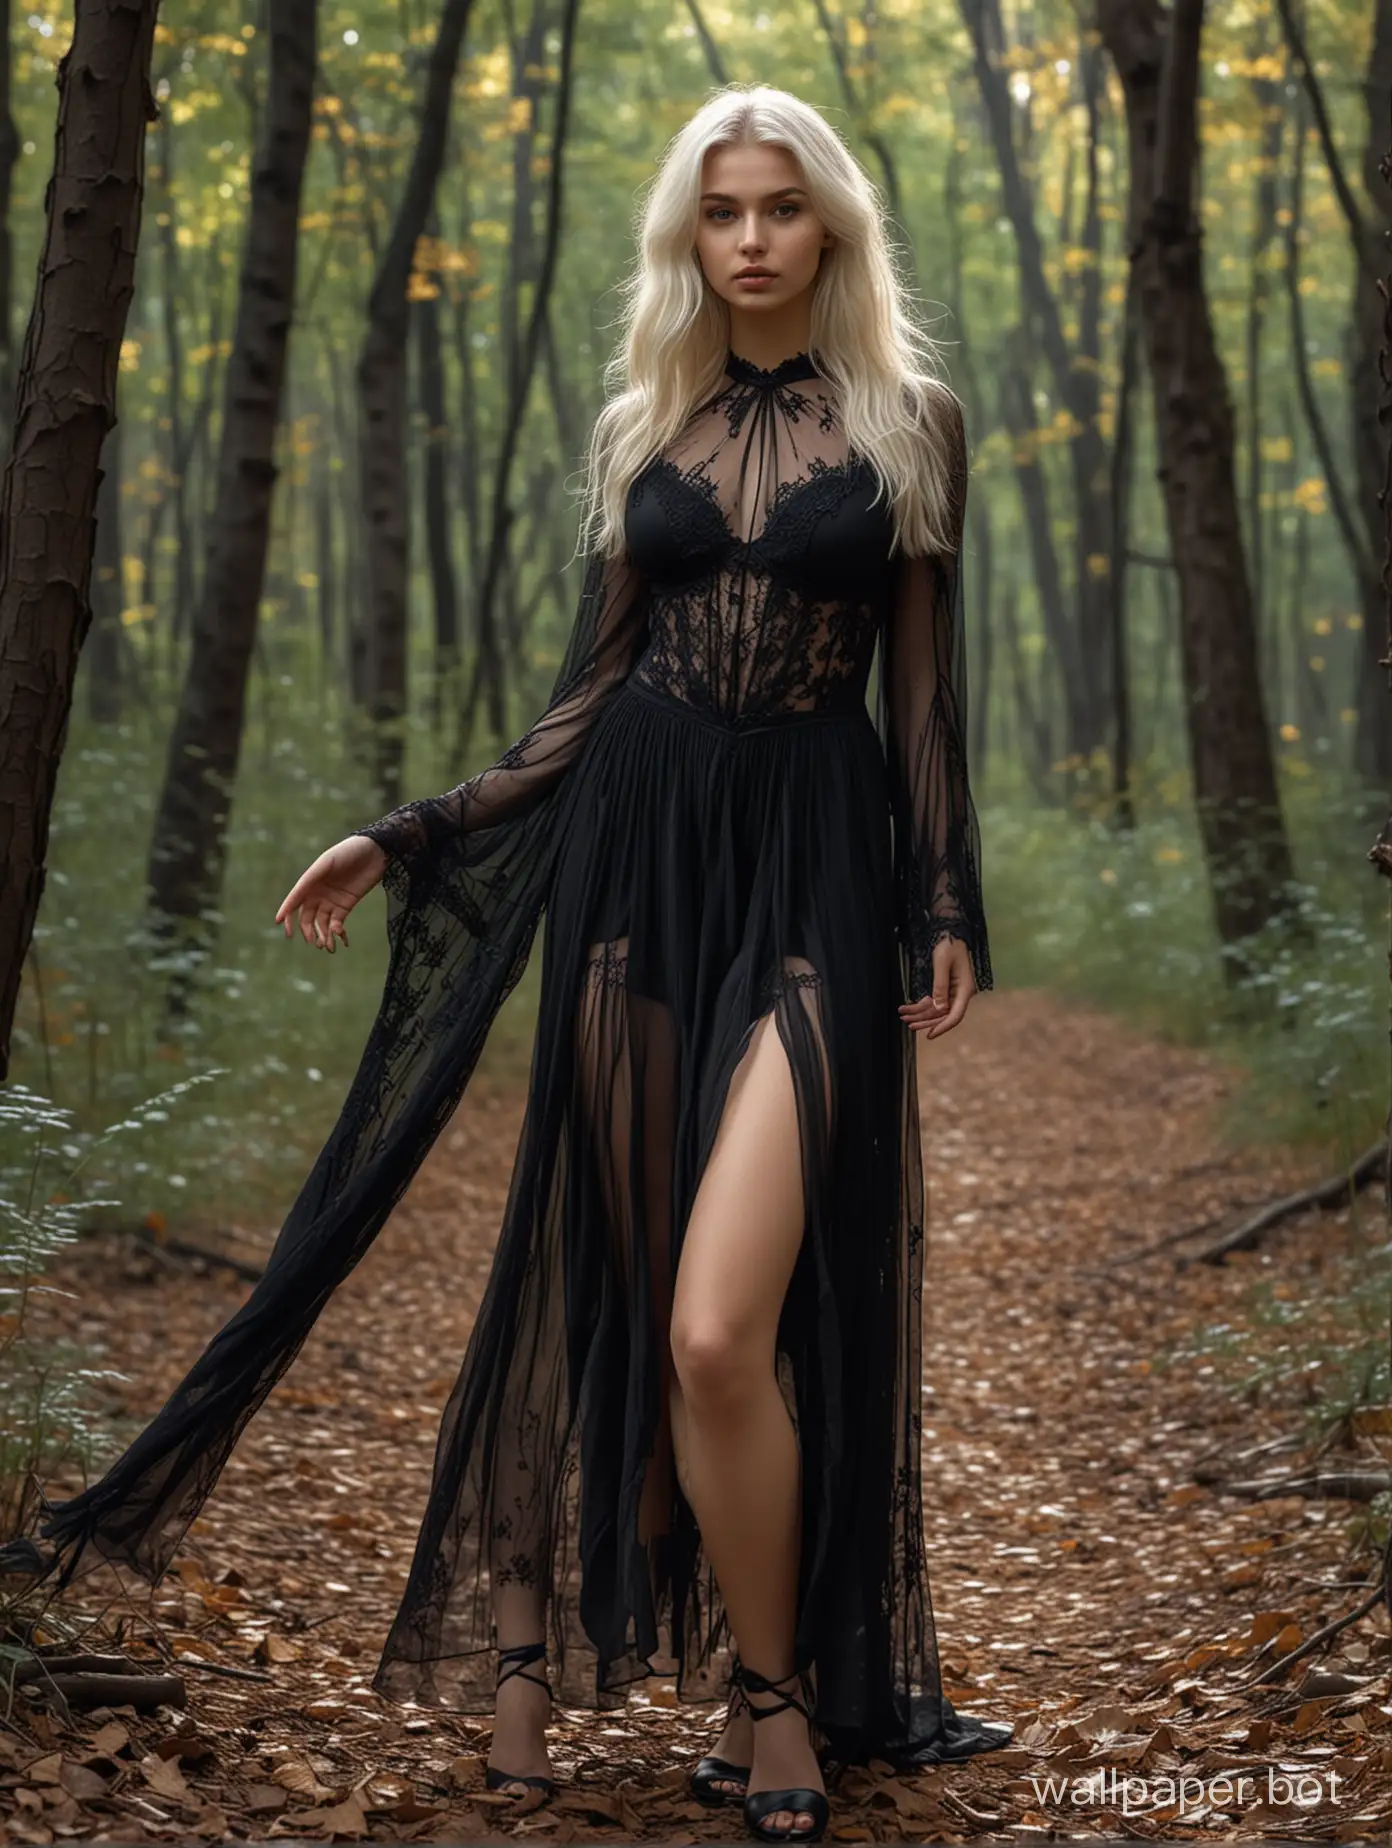 Photo of a beautiful 18 y.o. russian model, full body, wide shot, detailed skin, perfect body, very detailed, 4K HQ, 8K HDR, High contrast, shadows, platinum blonde hair, in forest, sheer black wizard dress, full body view